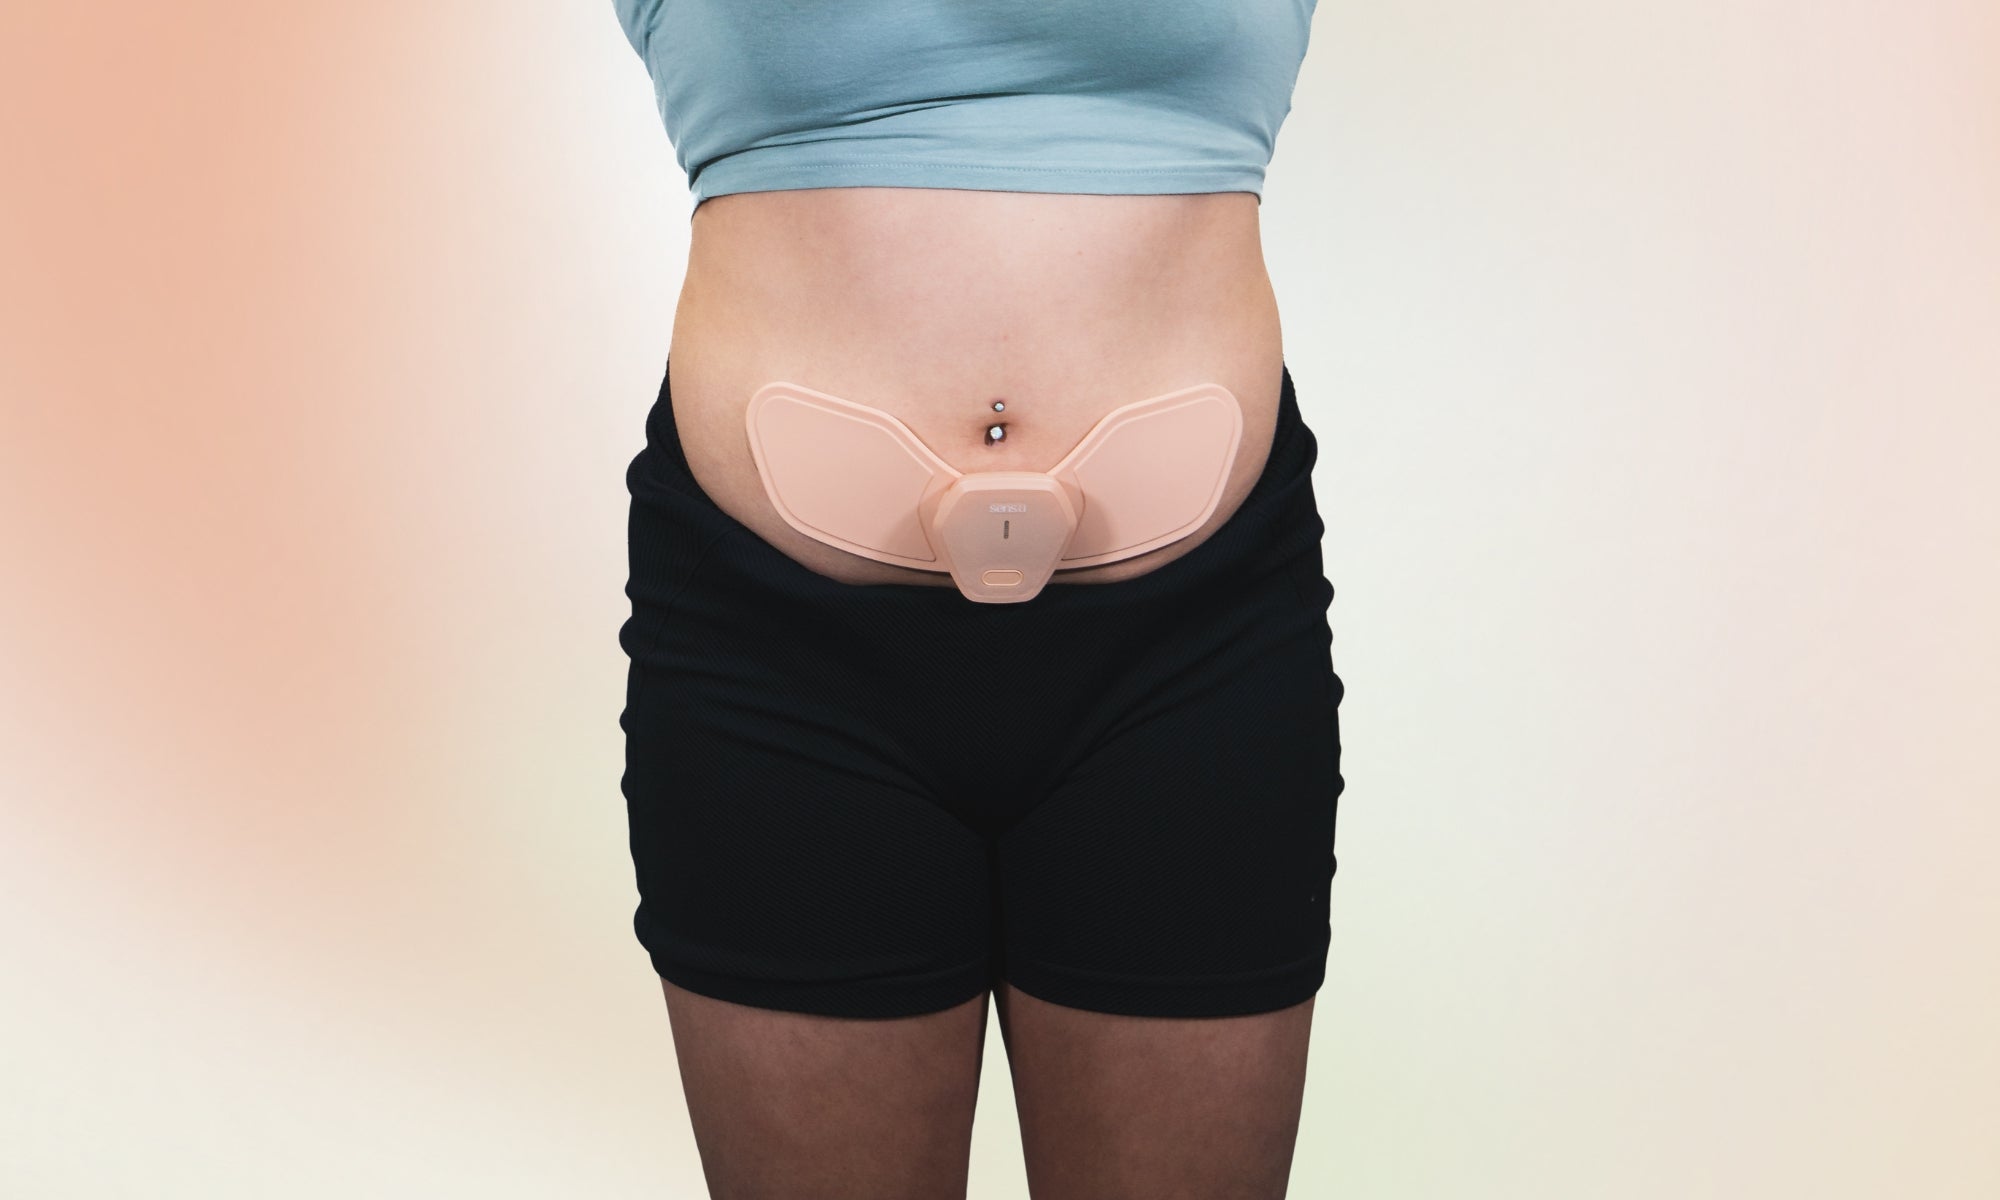 Sens.U Period Pain Relief Device Used on Female Subject